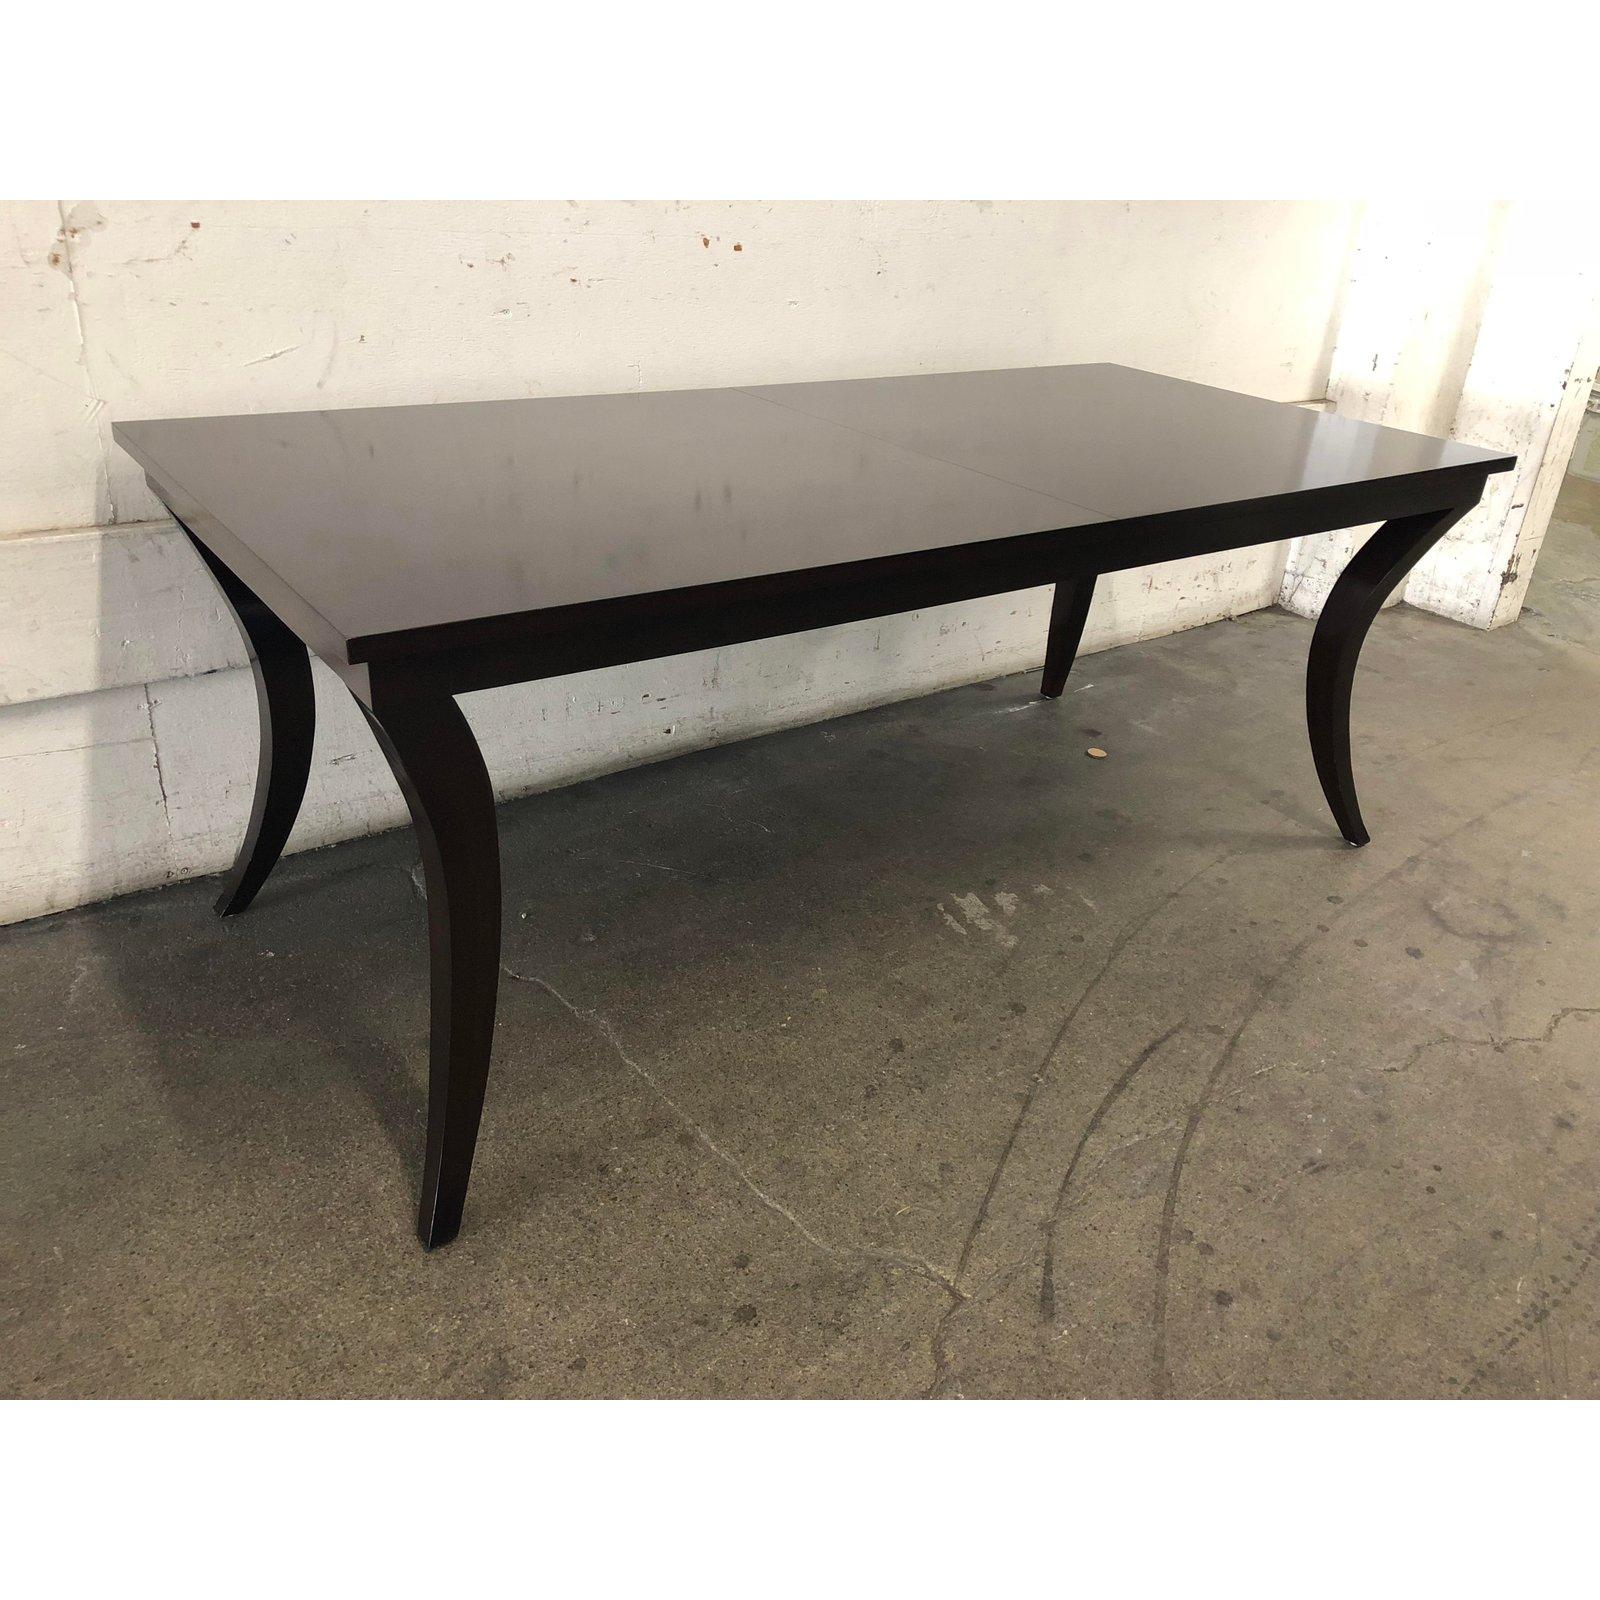 A contemporary dining table in a deep dark brown finish. The unique legs are a contemporary turn on traditional sabre legs, tapered and turned inwards toward each other at a 45 degree angle. Like the slender arched legs of the gazelle, these table